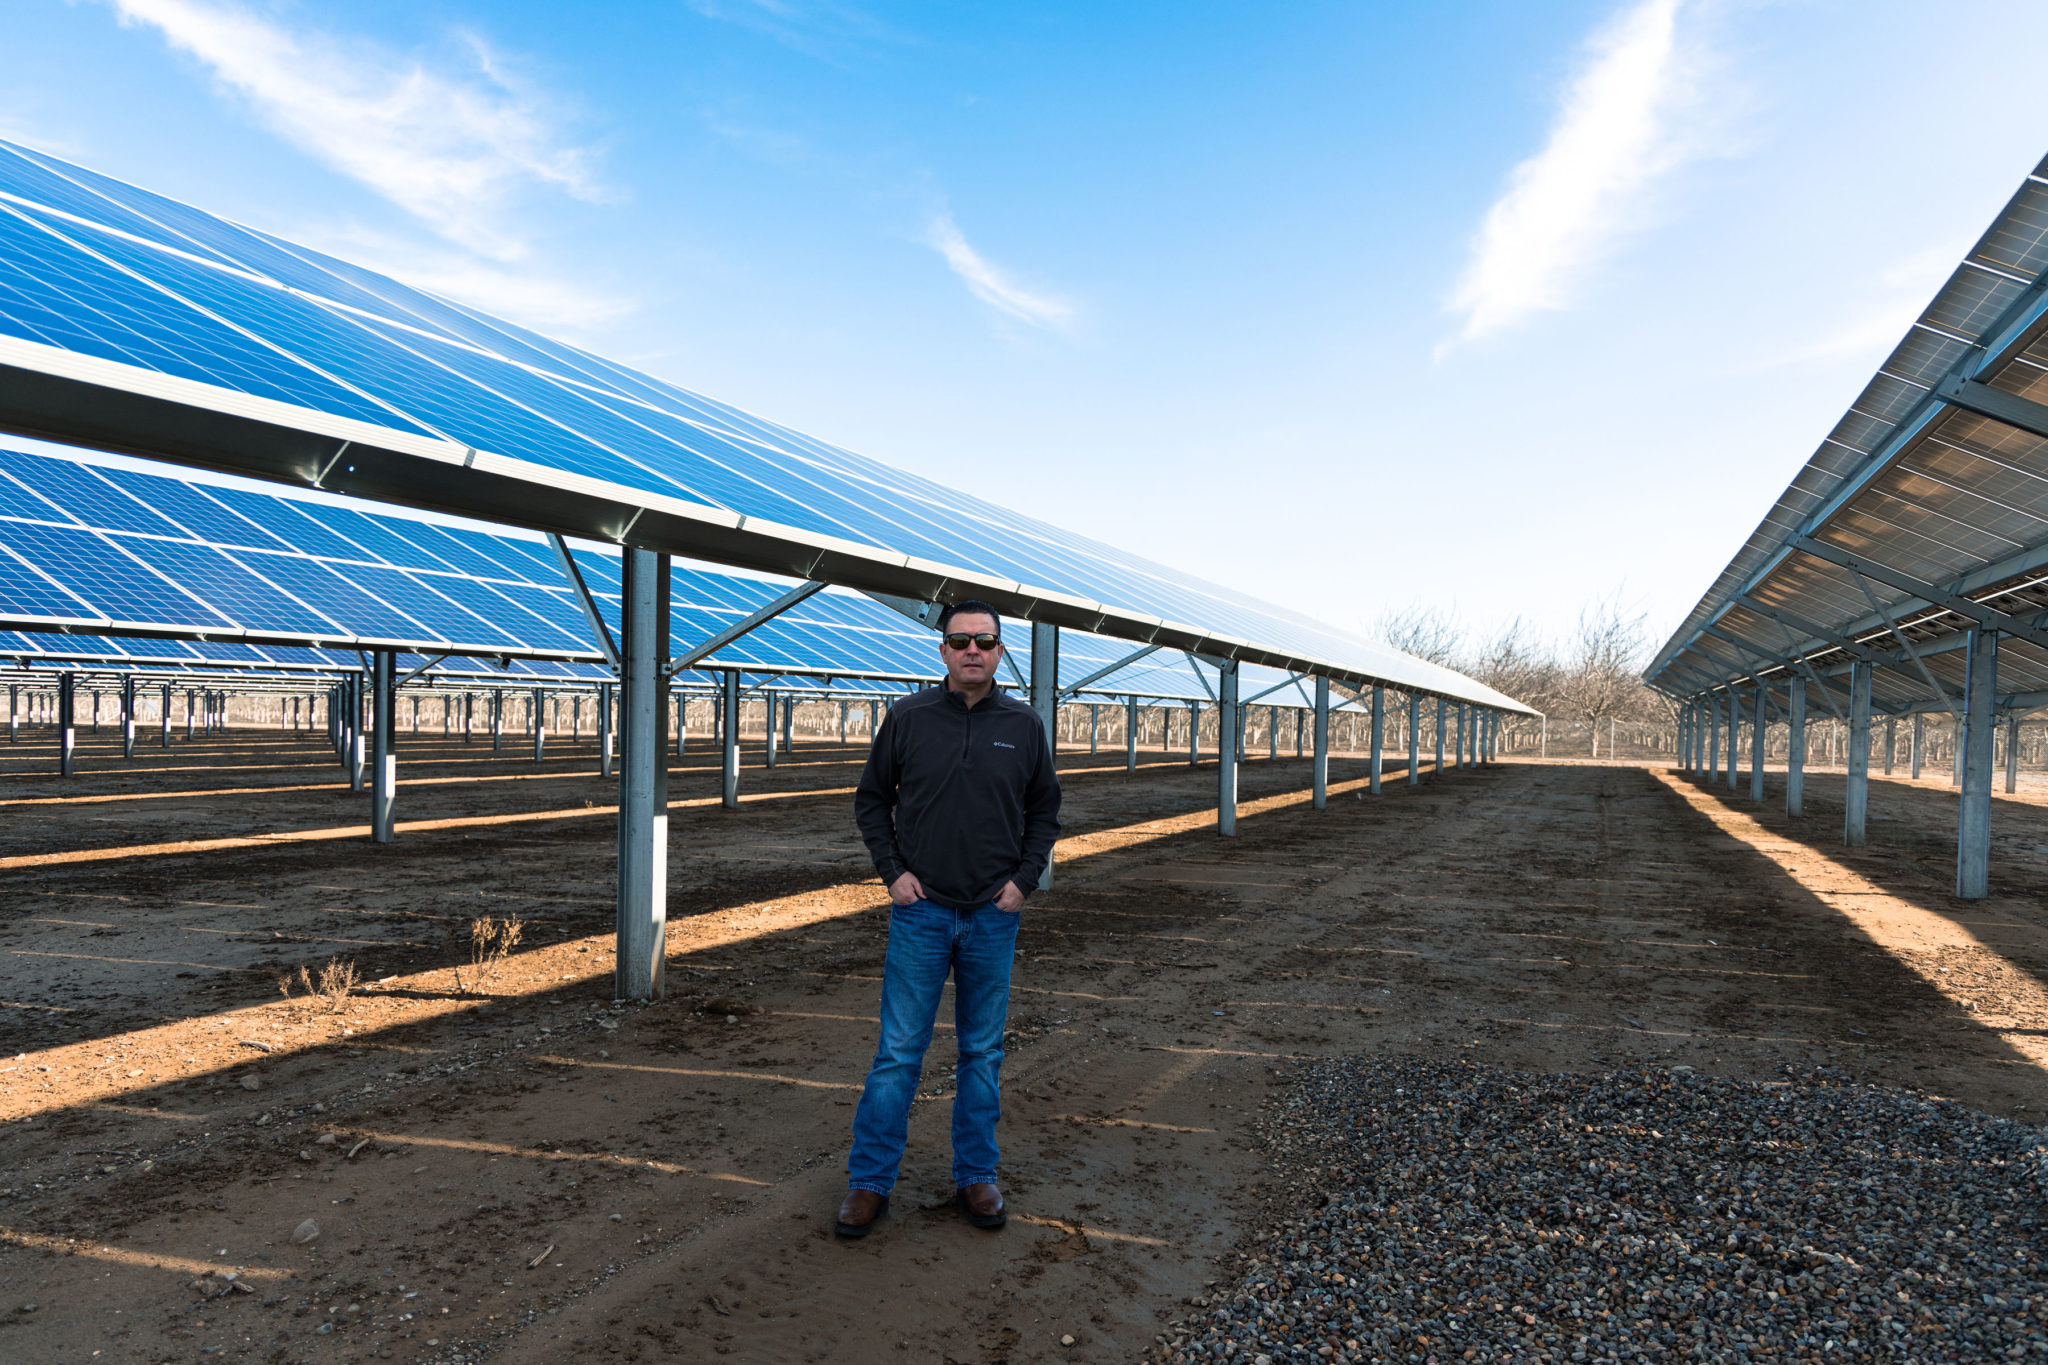 Man standing among rows of ground-mounted solar panels on a farm in California.